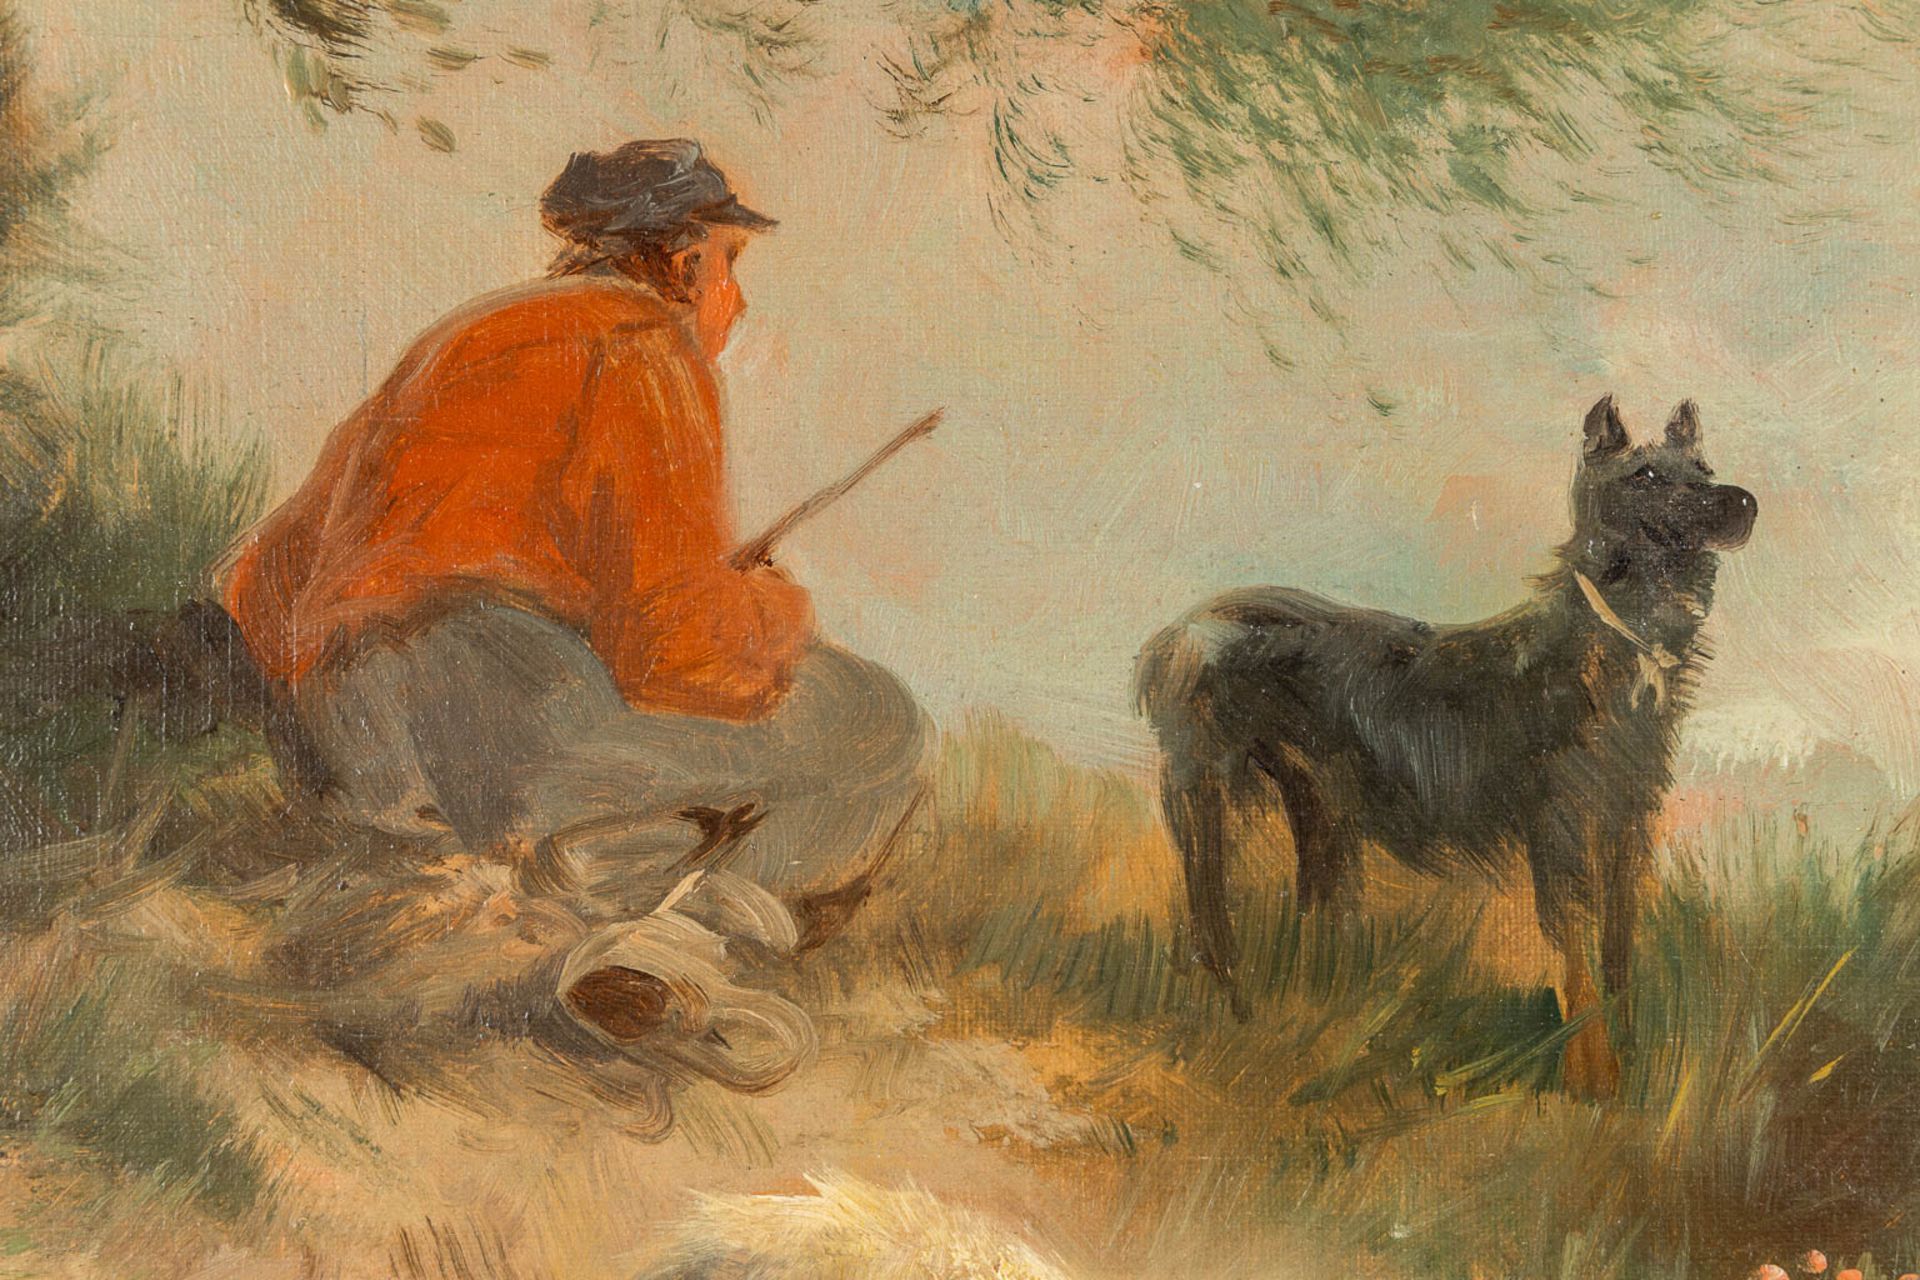 Henry SCHOUTEN (1857/64-1927) 'Sheep herder on the look' oil on canvas. (W:80 x H:60 cm) - Image 4 of 9